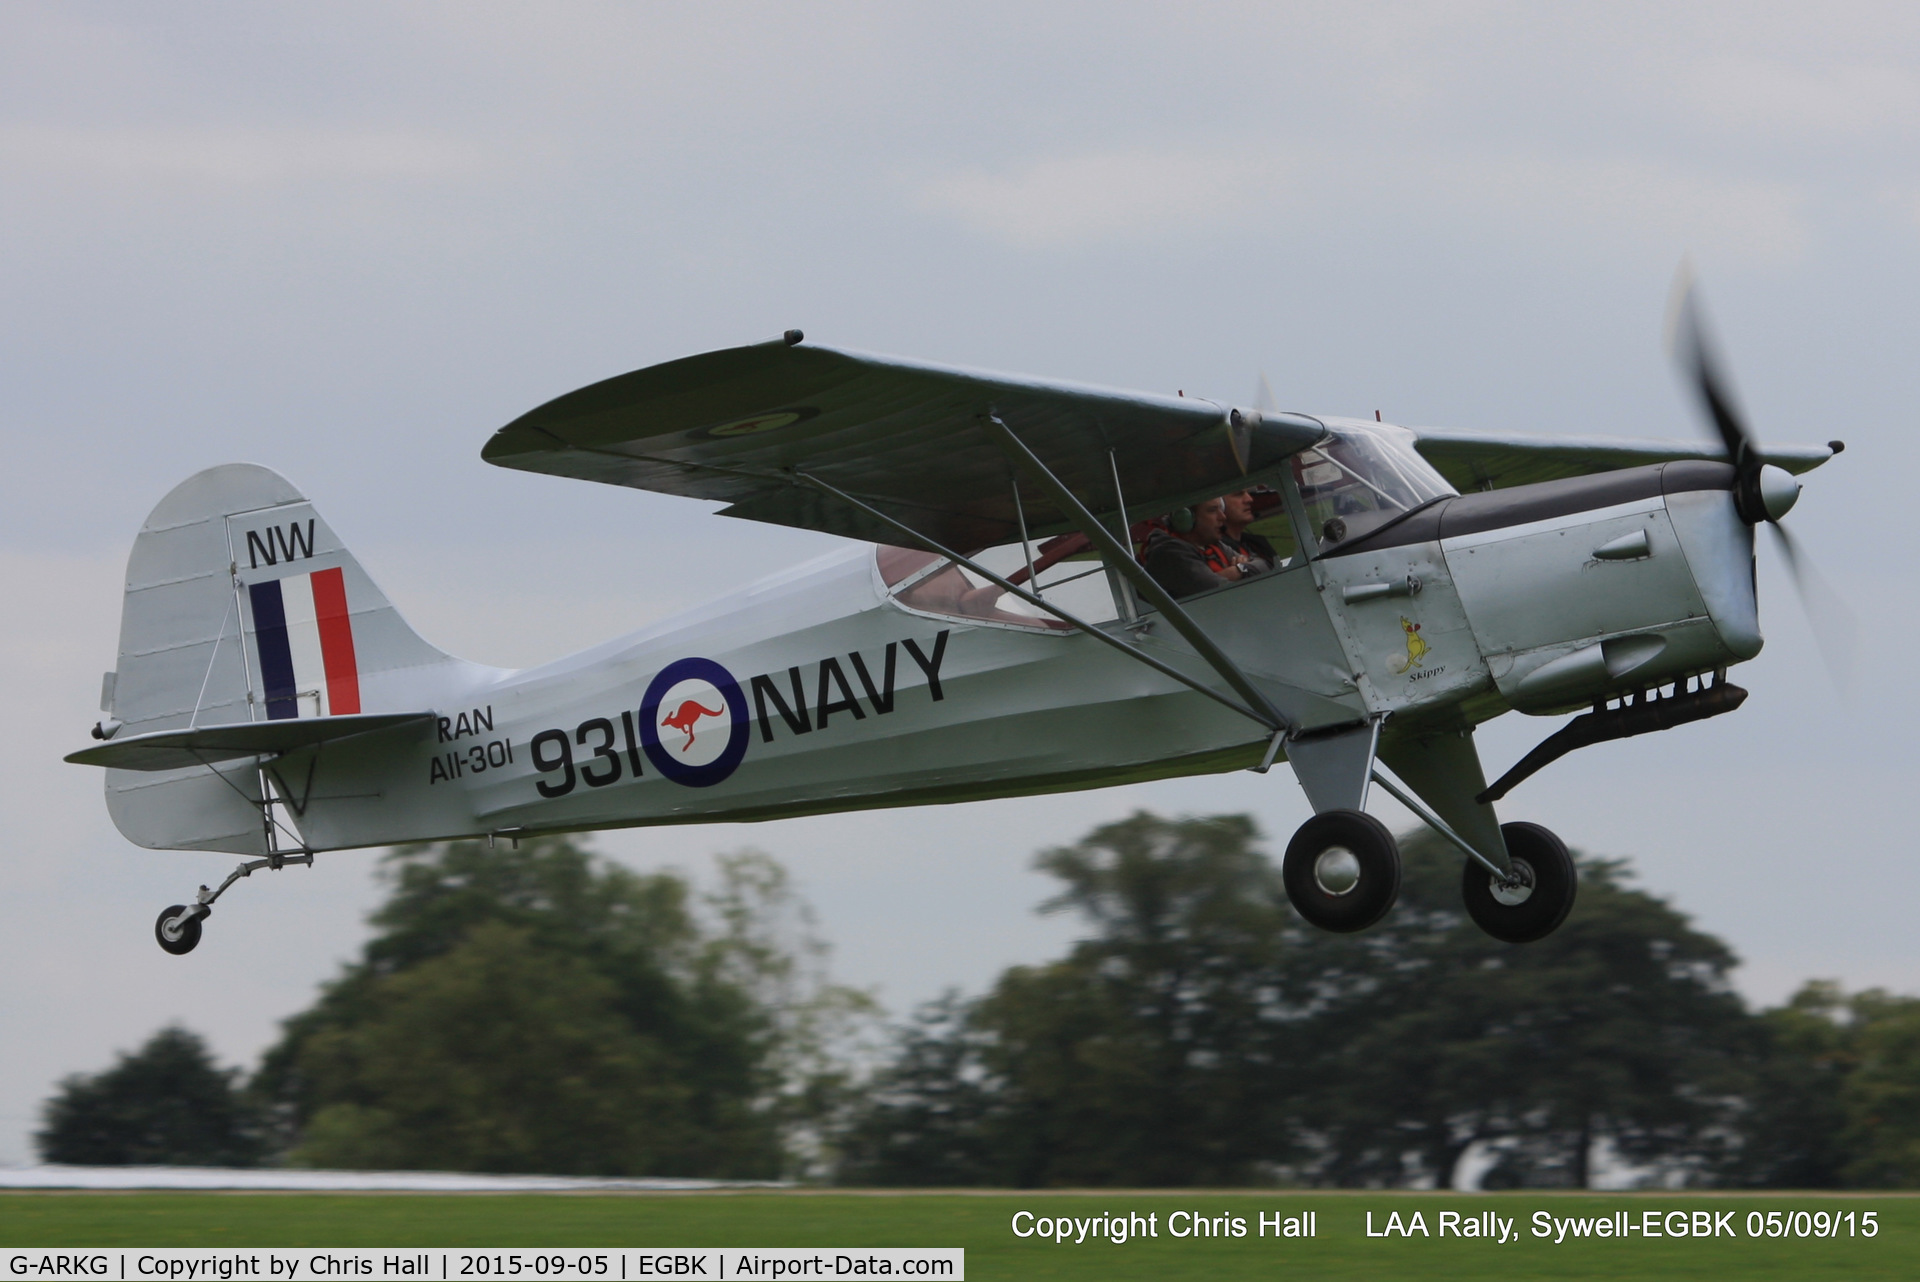 G-ARKG, 1952 Auster J-5G Autocar C/N 3061, at the LAA Rally 2015, Sywell